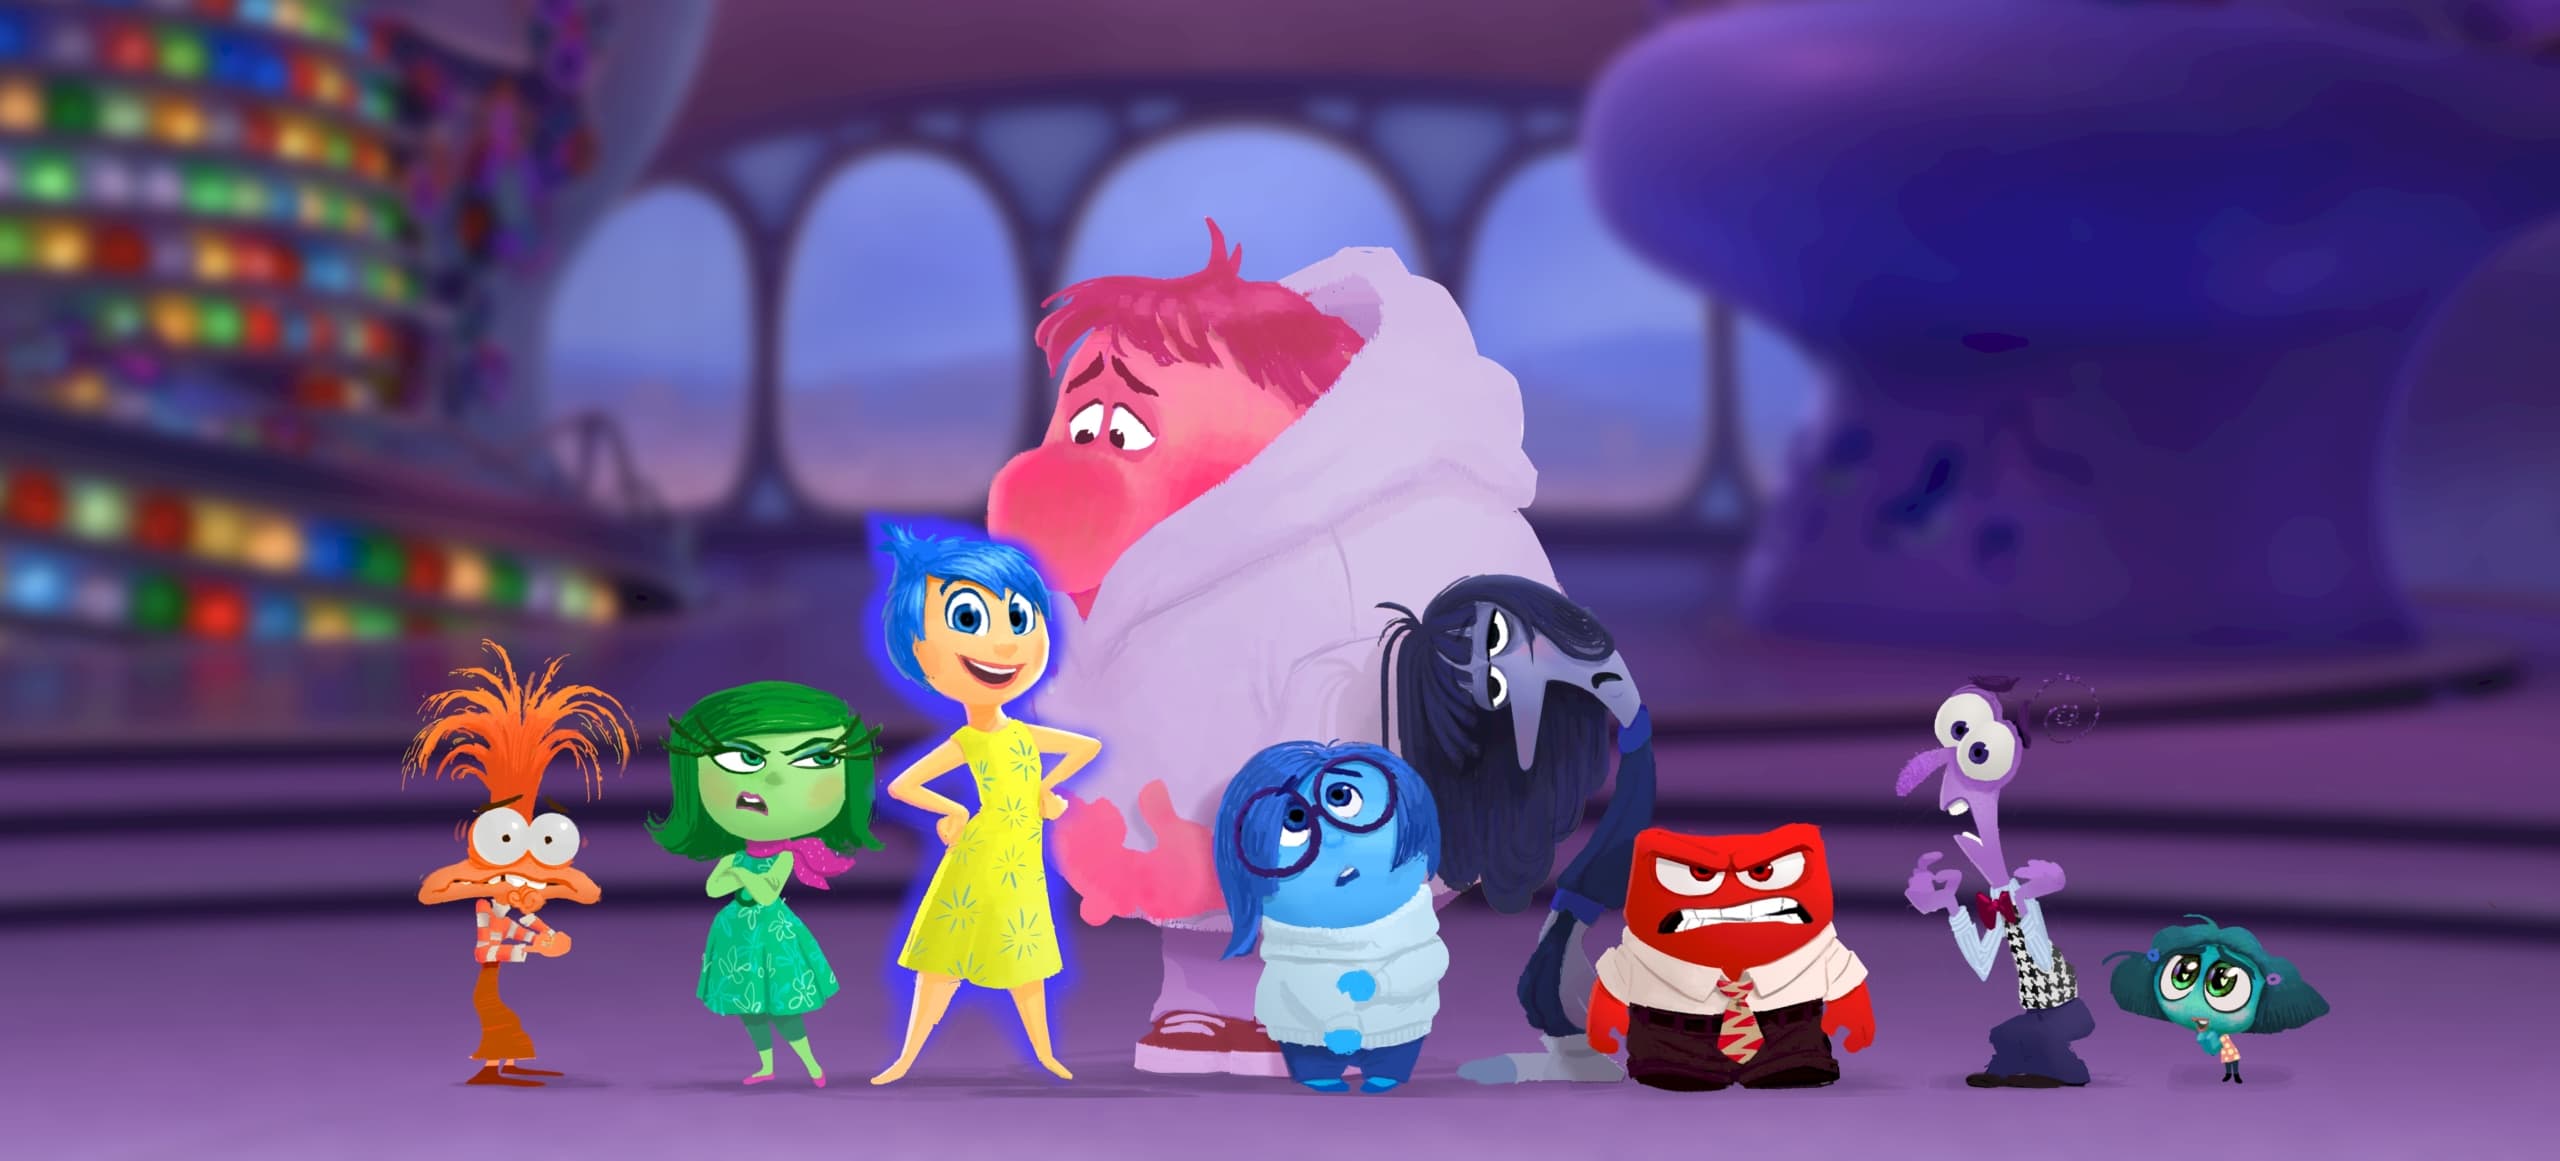 Behind the Scenes of Inside Out 2